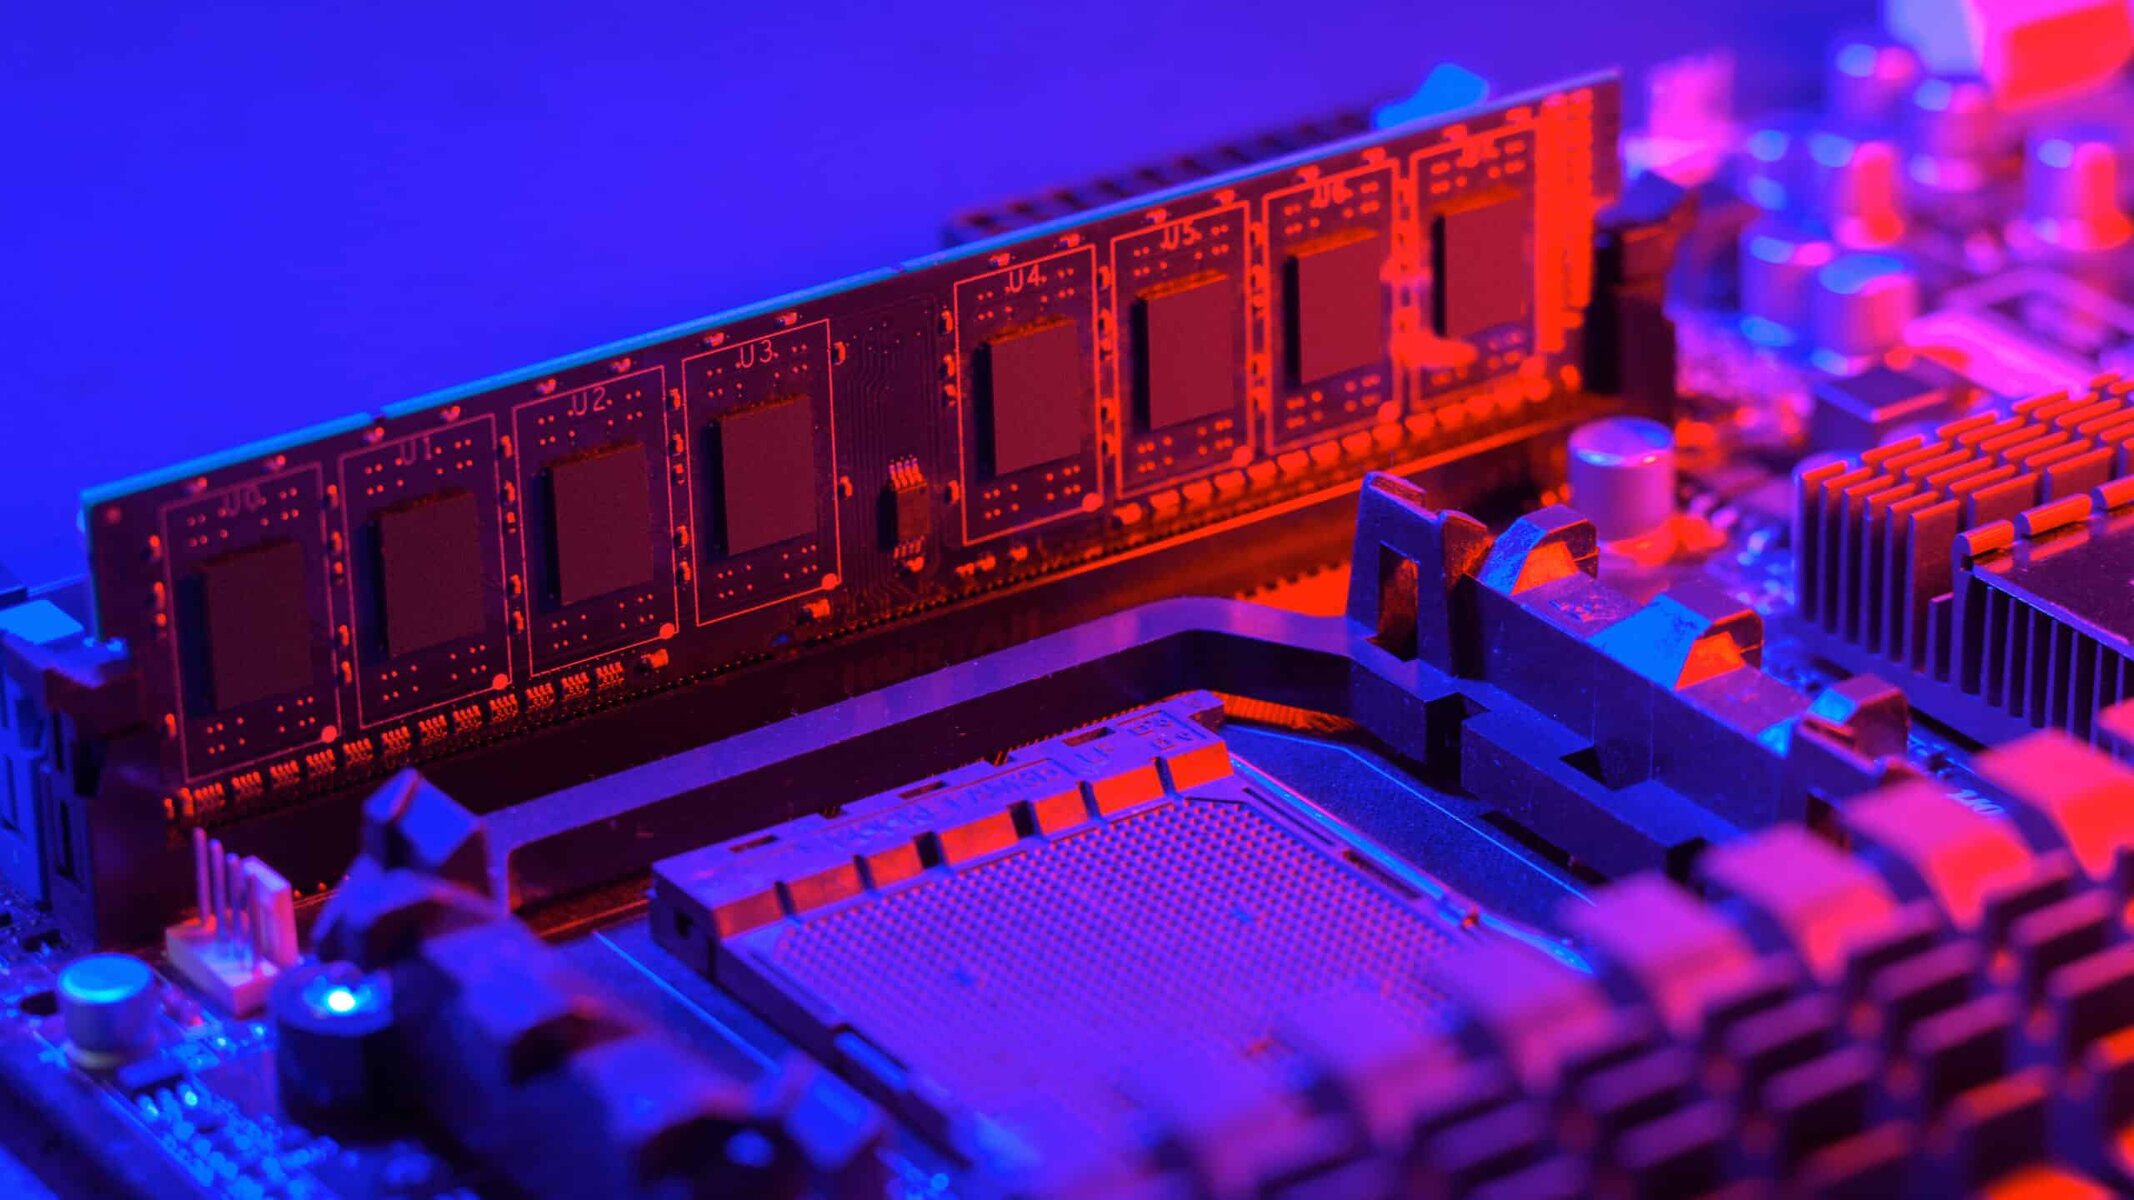 How Do You Find How Much RAM Your Computer Has